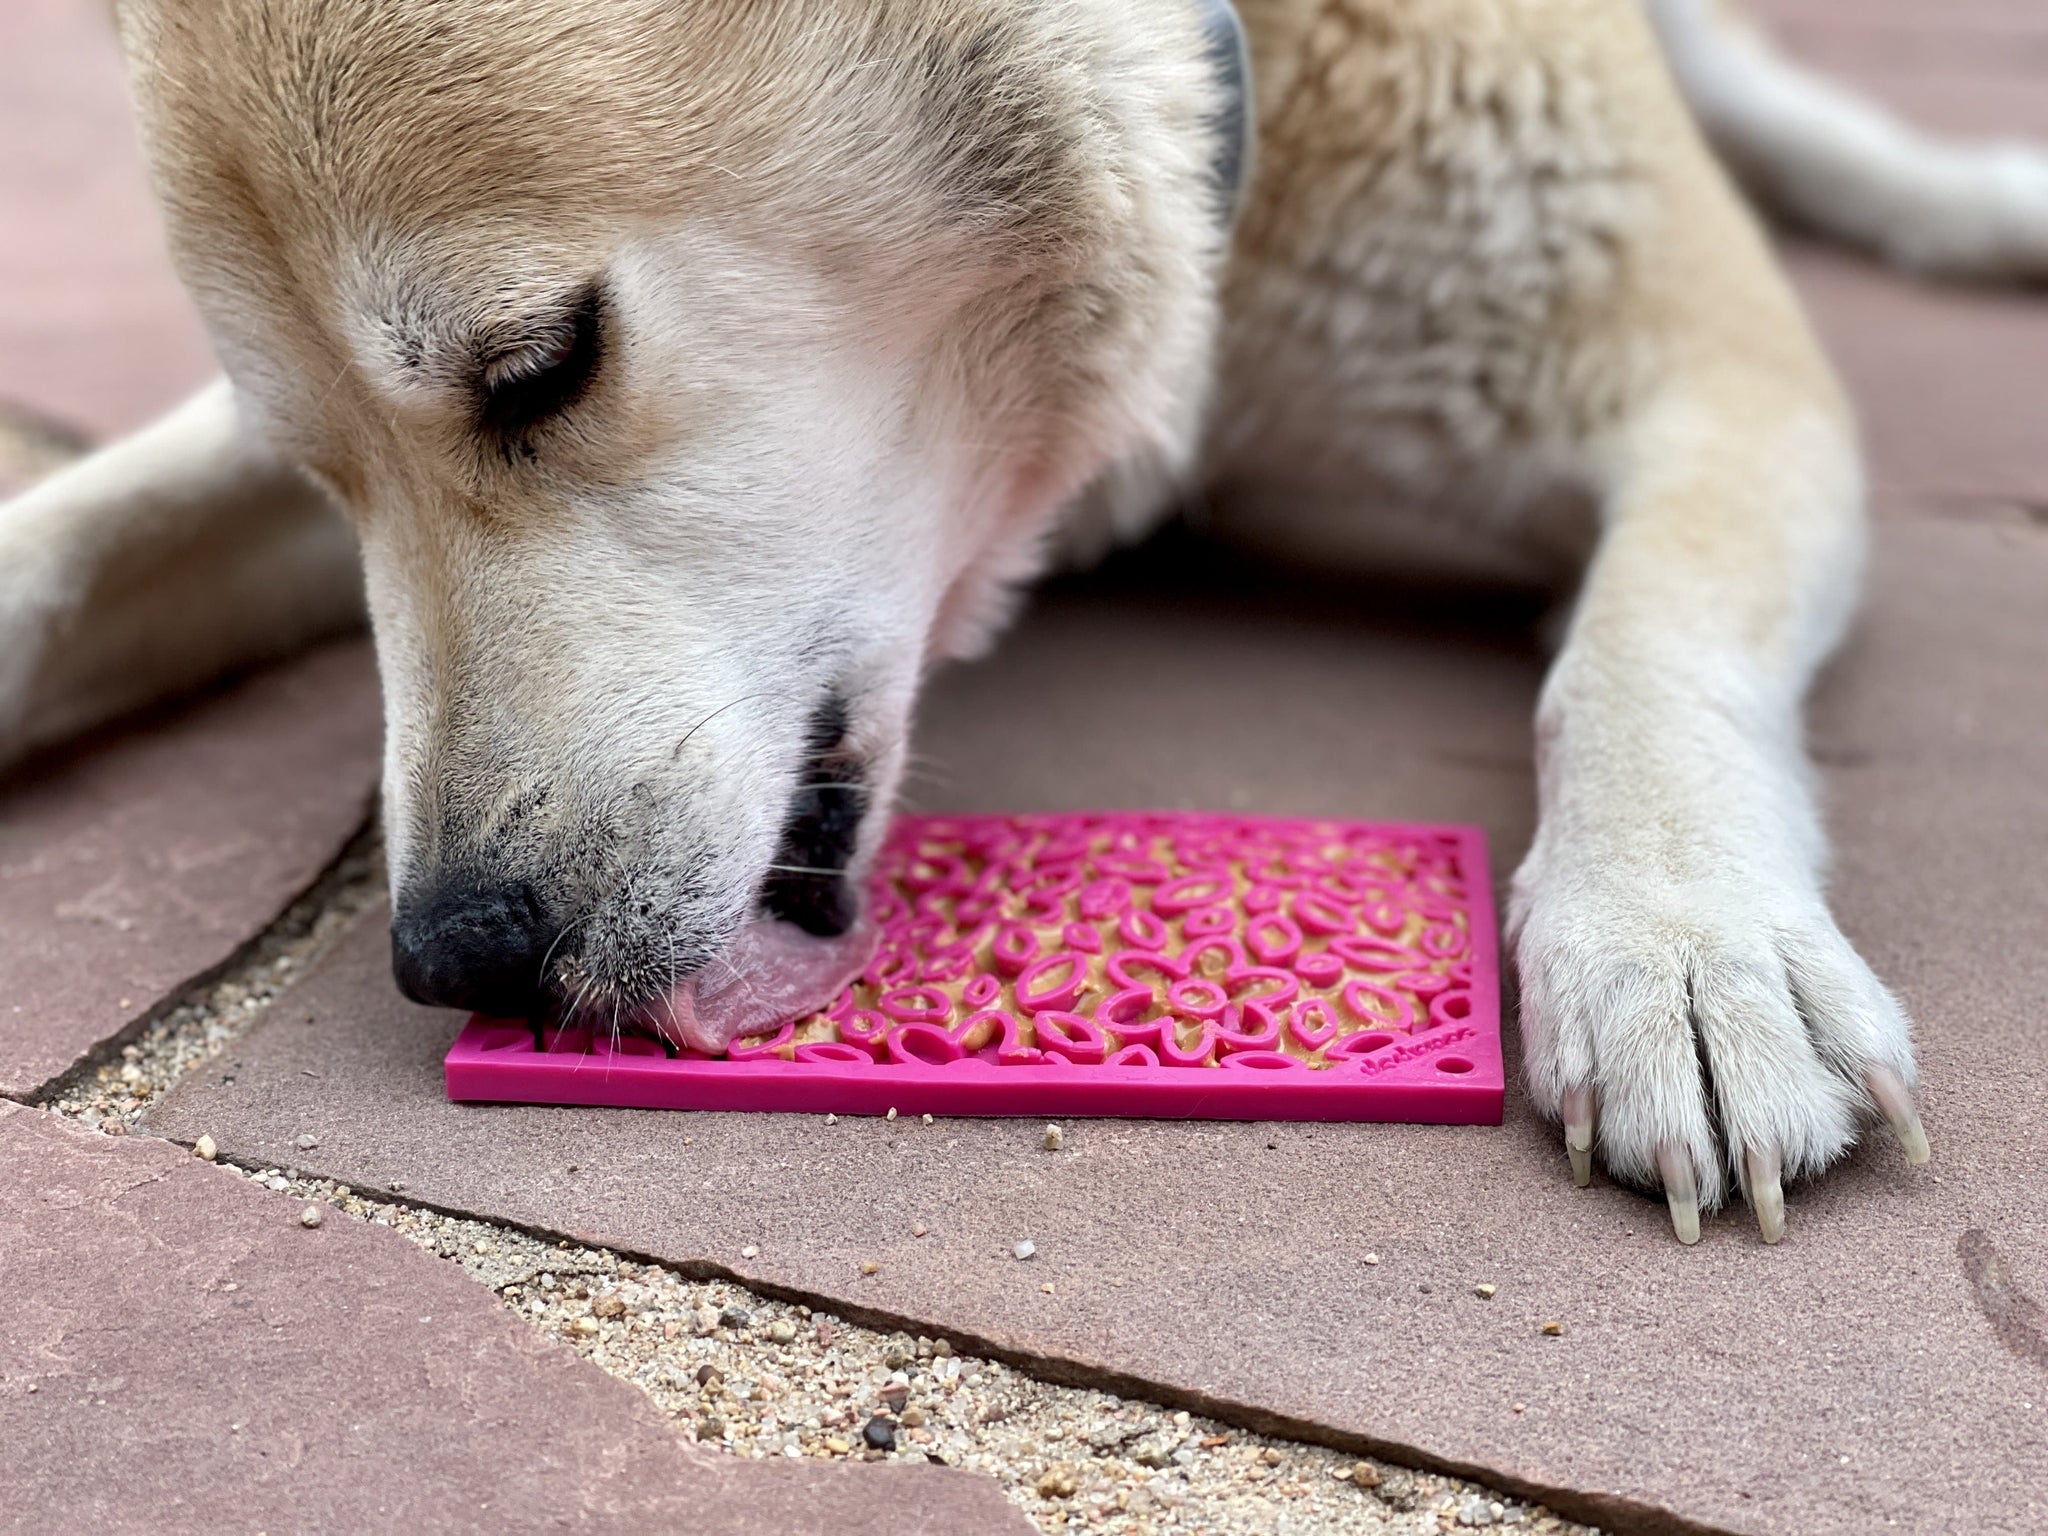 8 Lick Mat Recipes for Dogs That Will Satisfy Your Pup